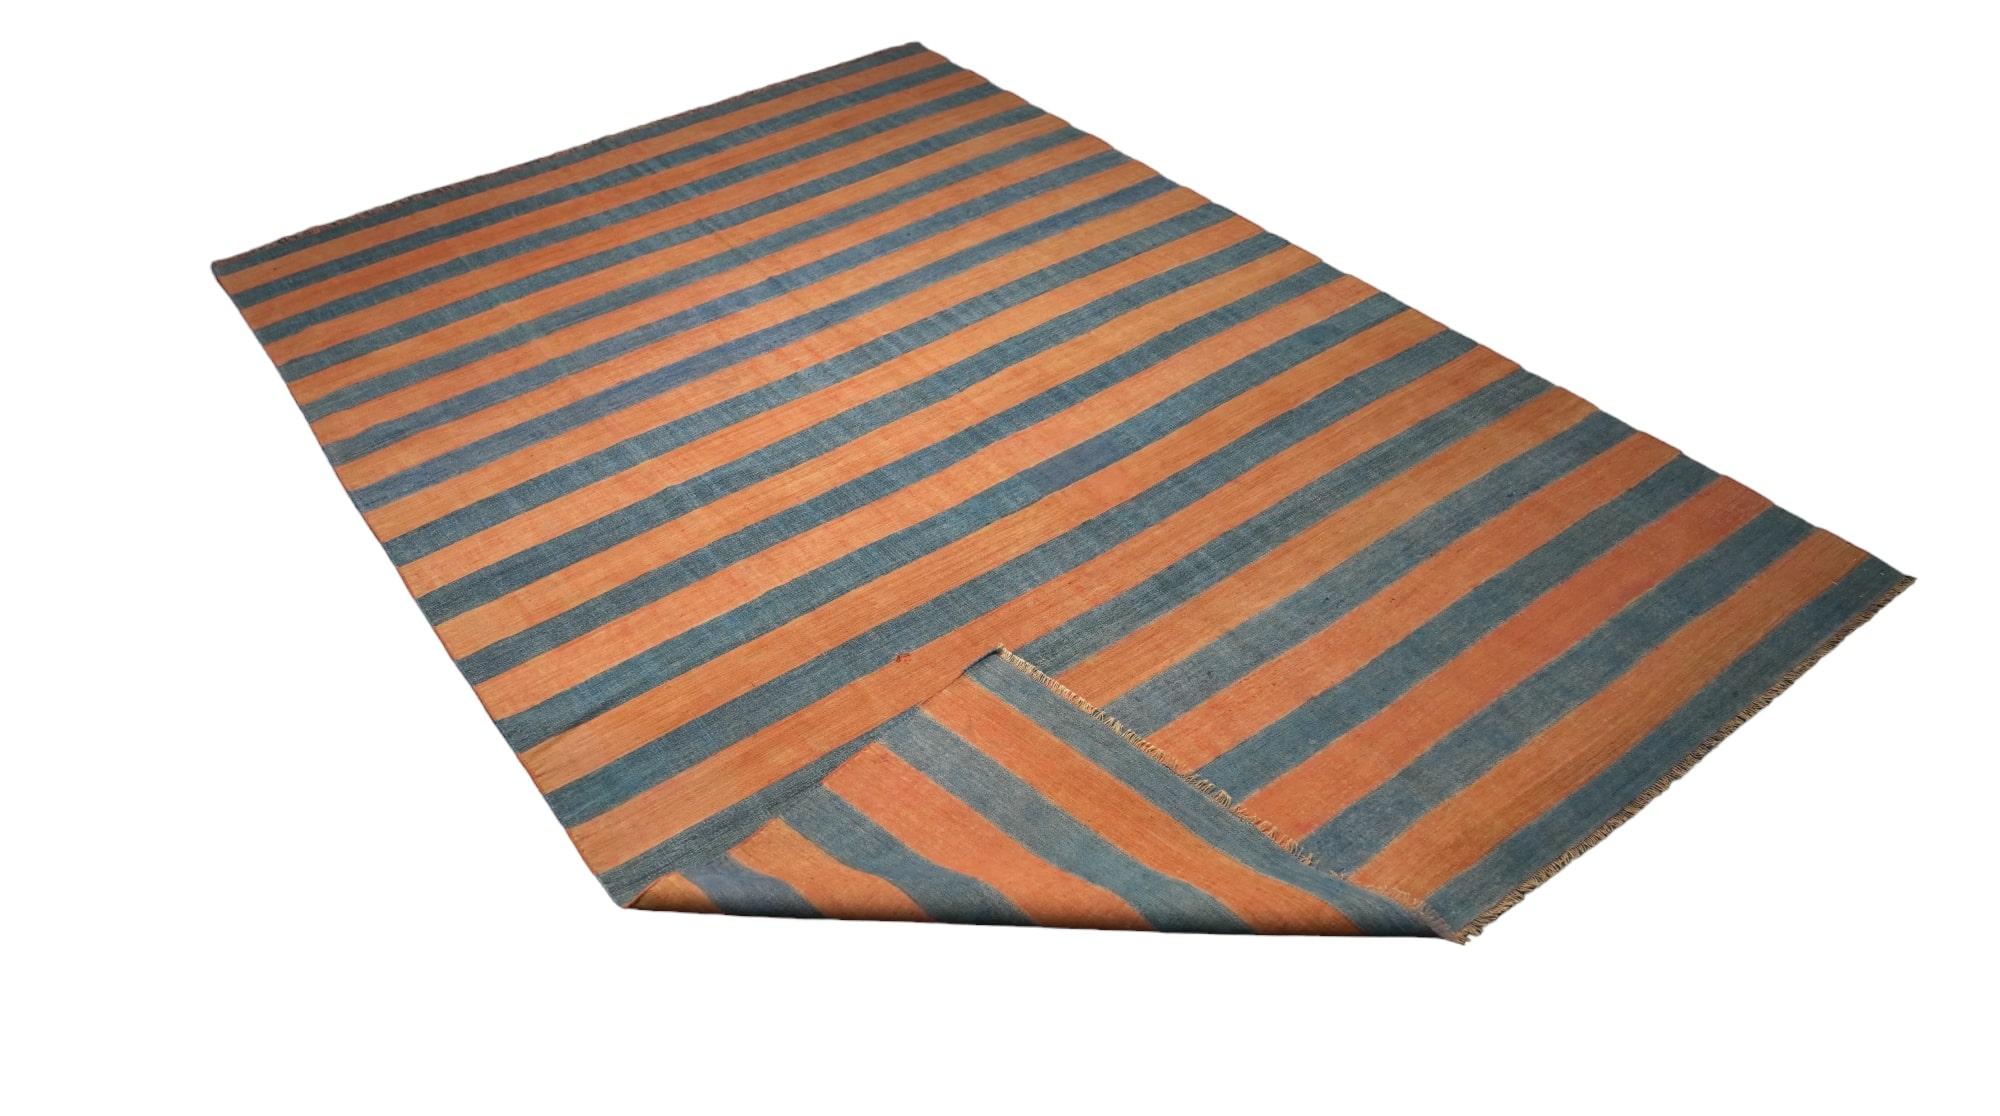 Indian Vintage Dhurrie Rug, with Rust and Blue Stripes, from Rug & Kilim For Sale